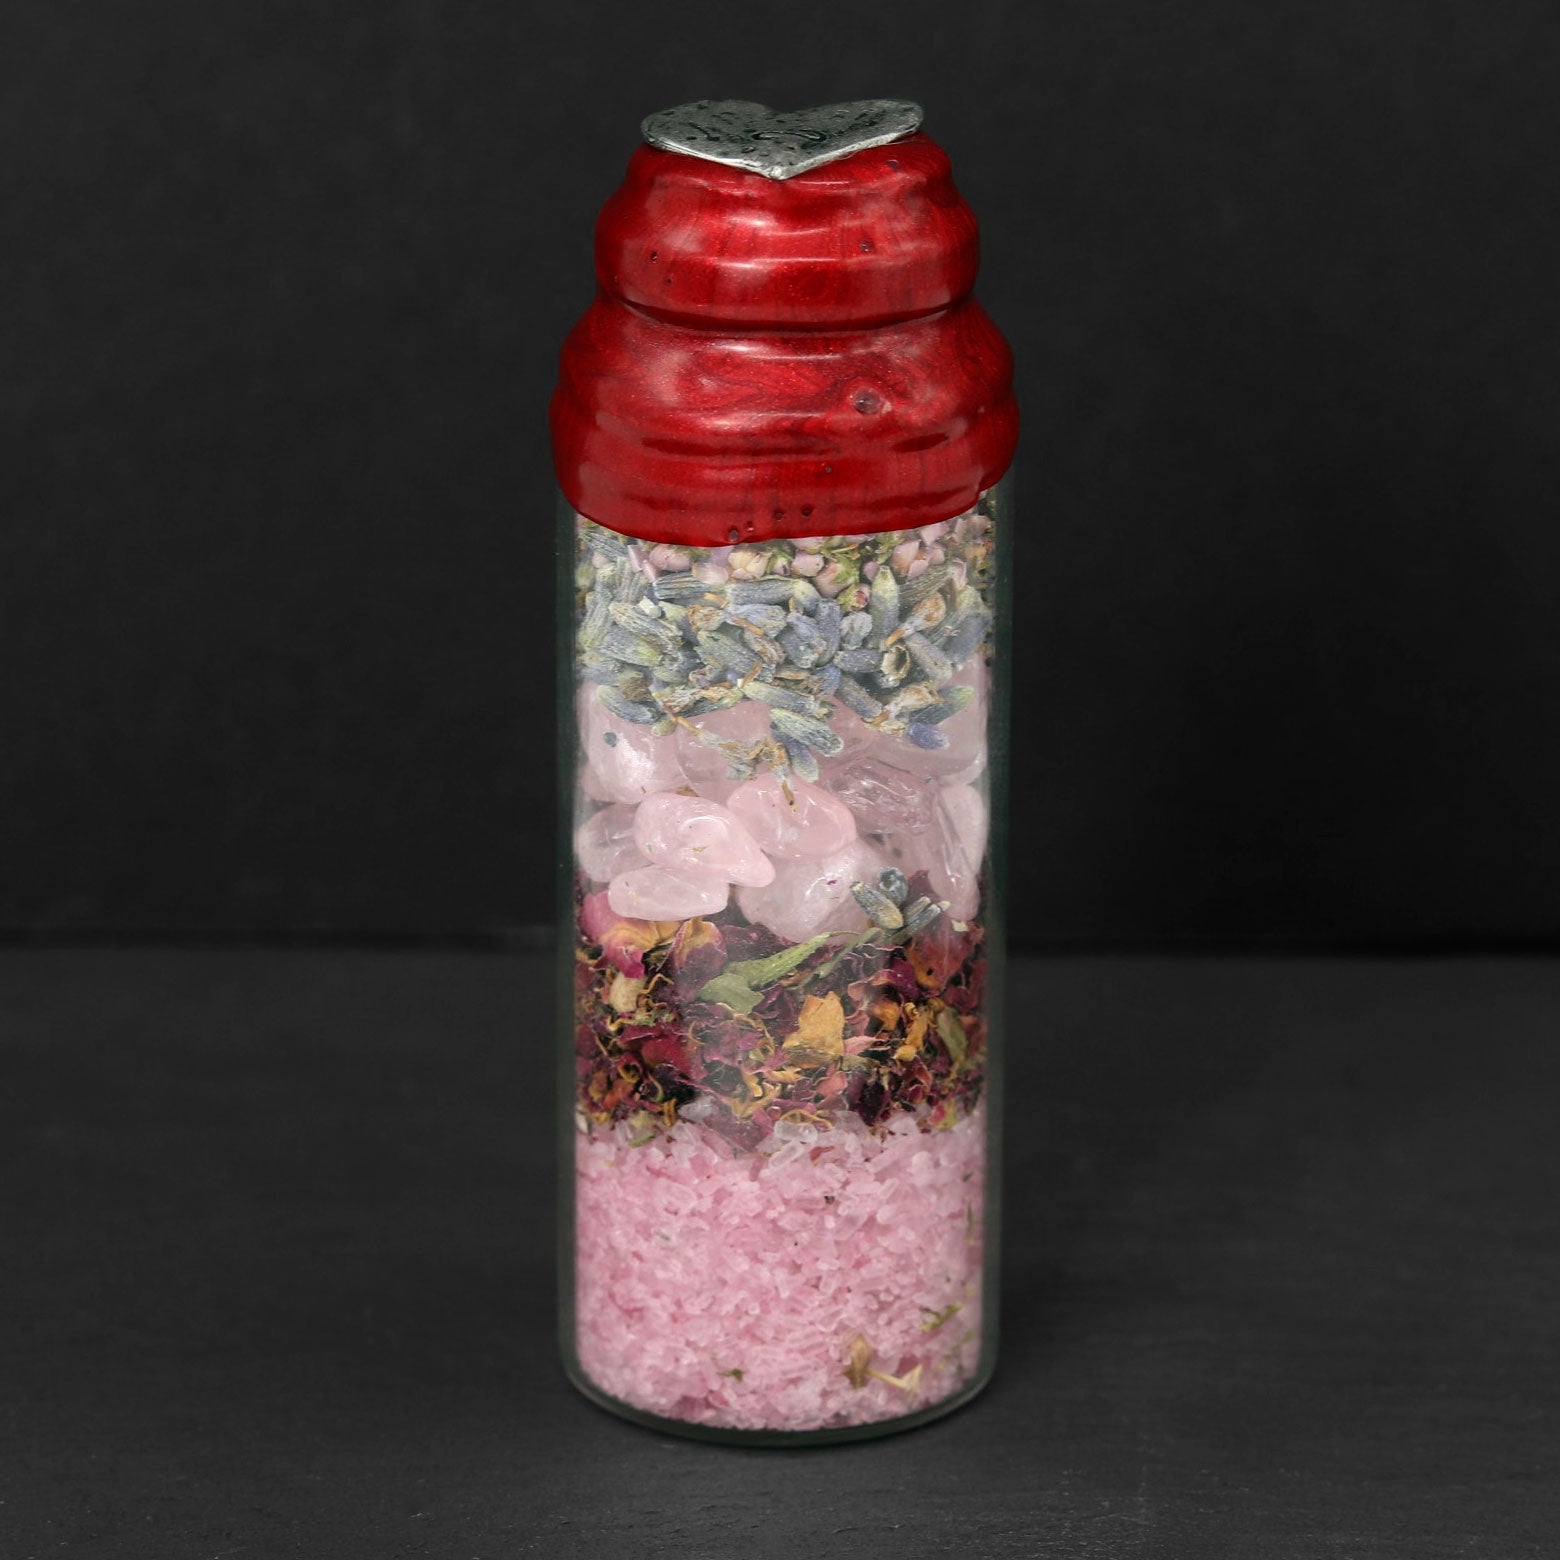 Love Spell Bottle Layered with Herbs and Gemstones - 13 Moons